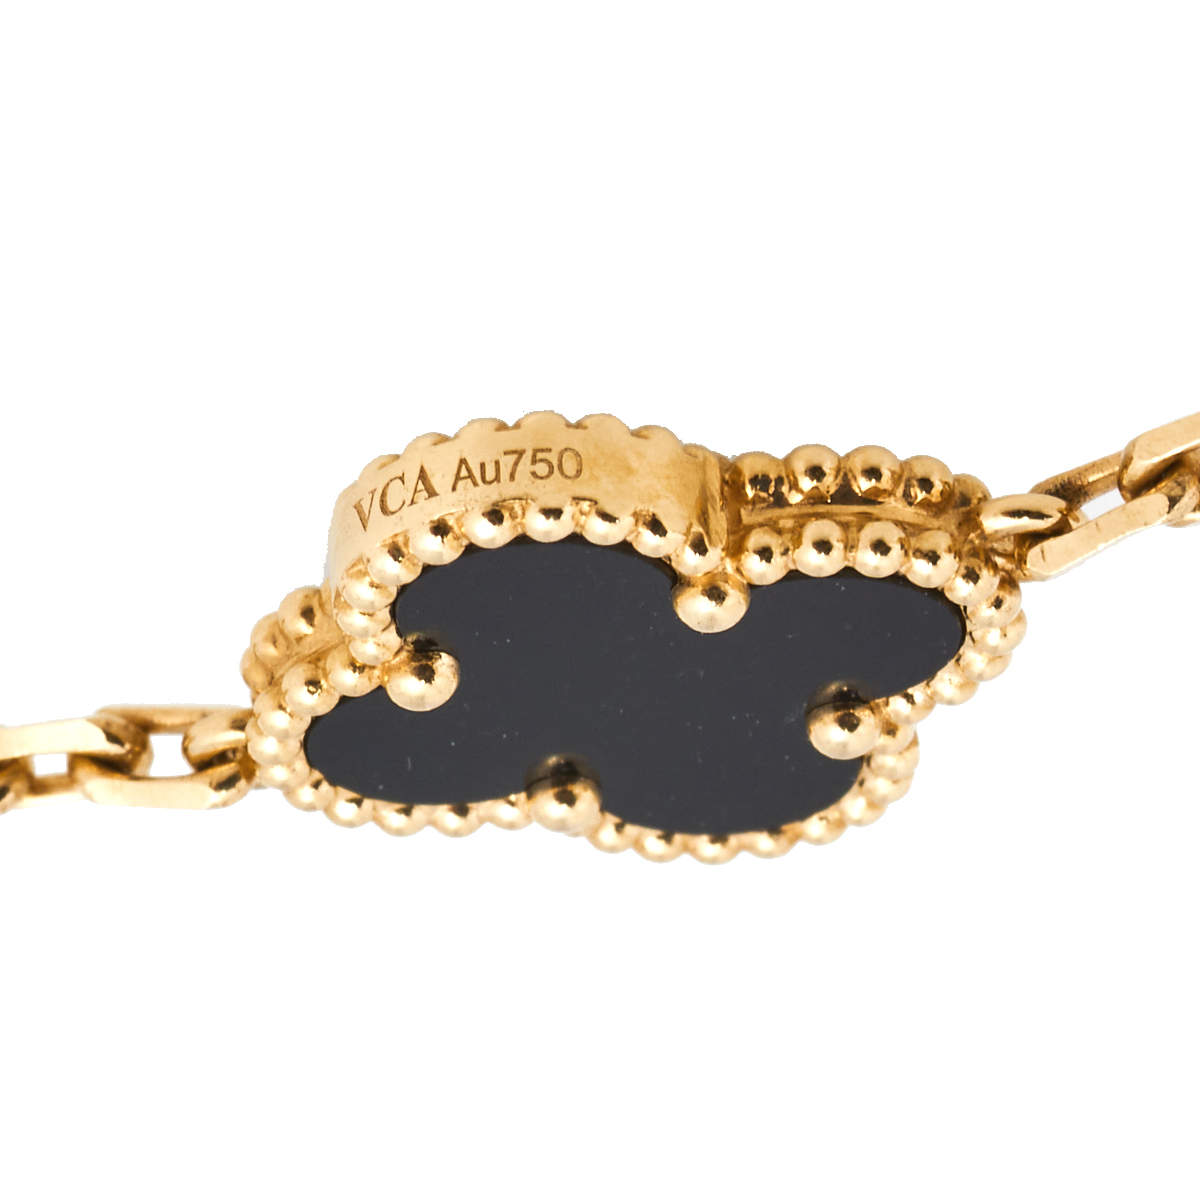 Onyx and Gold 'Alhambra' Necklace, 20 Motif, Van Cleef and Arpels Beekman  New York - Fine Jewelry Rental Service